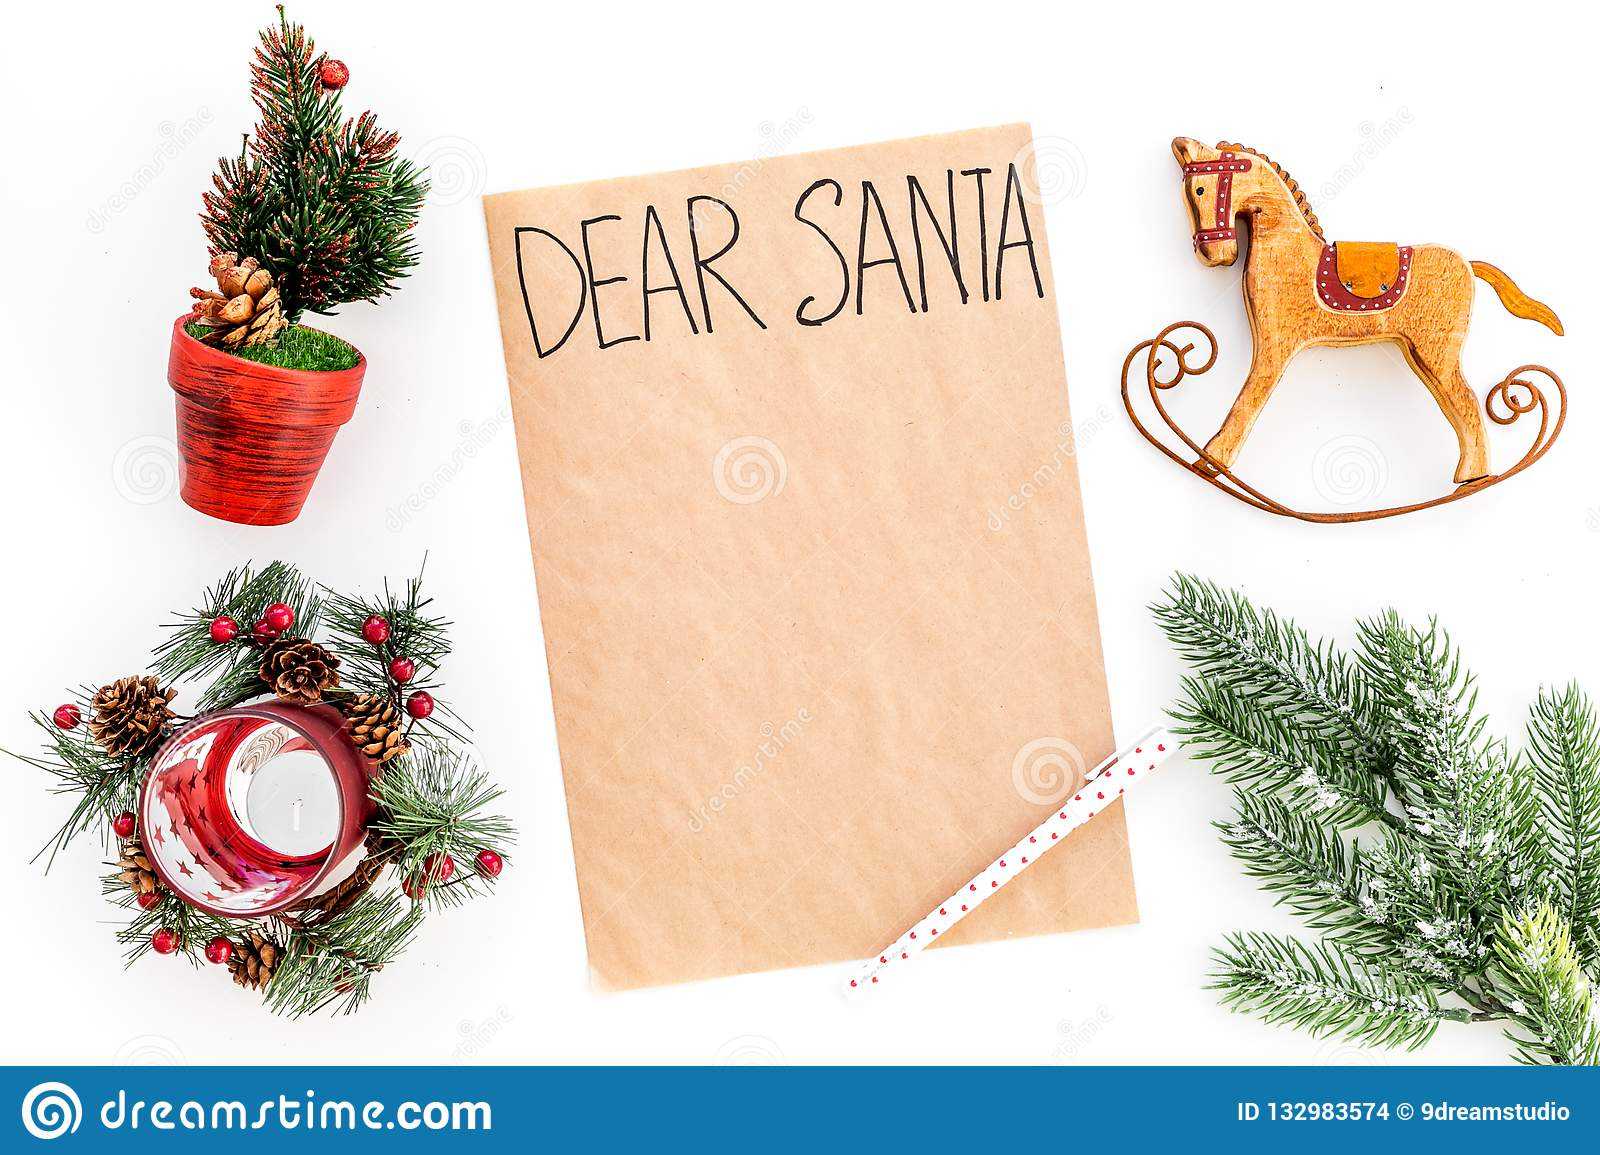 Letter To Santa Claus Template. Mockup On Craft Paper With Throughout Dear Santa Template Kindergarten Letter